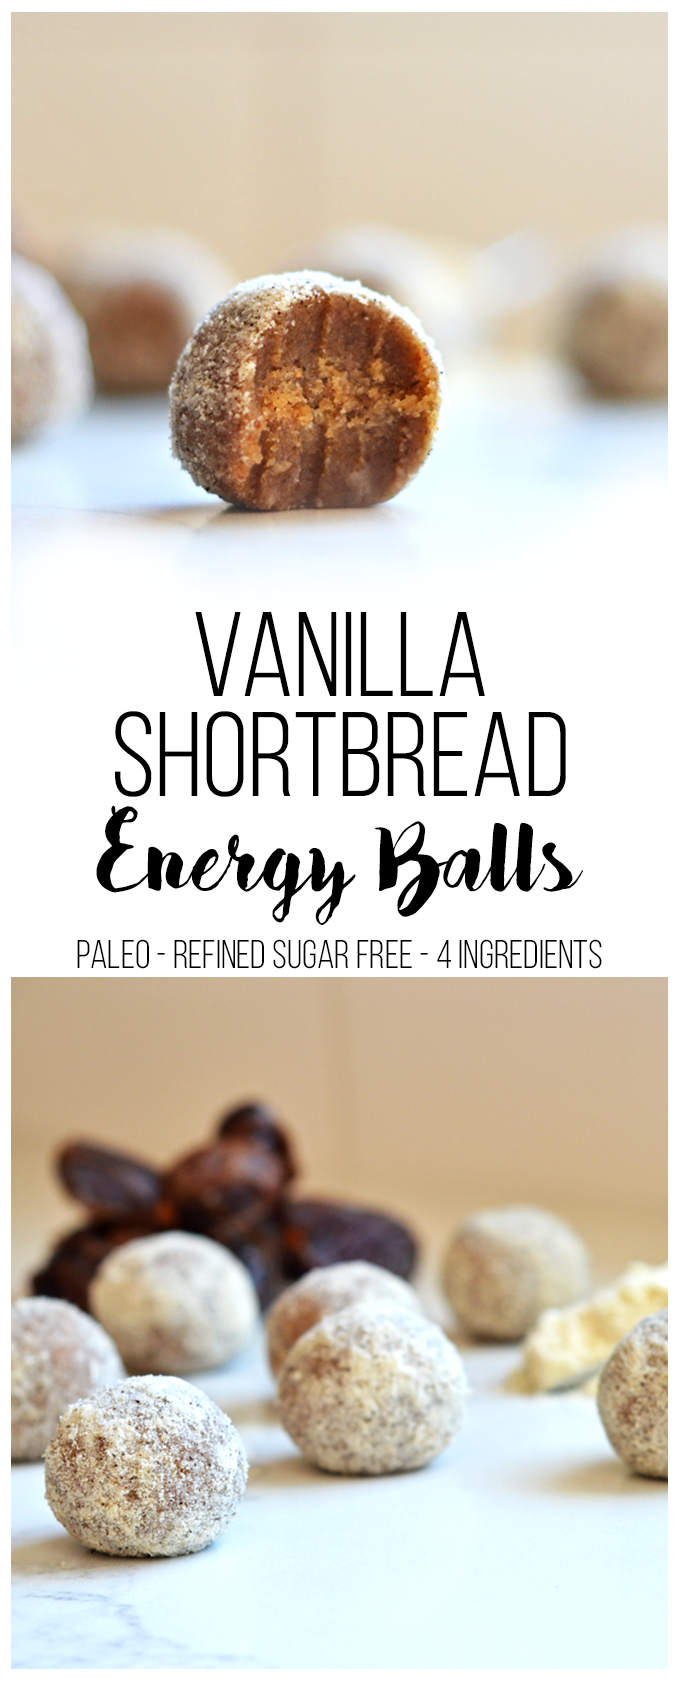 These Vanilla Shortbread Energy Balls recipe is perfect for a paleo snack or dessert that is clean, flavorful and only had 4 ingredients!